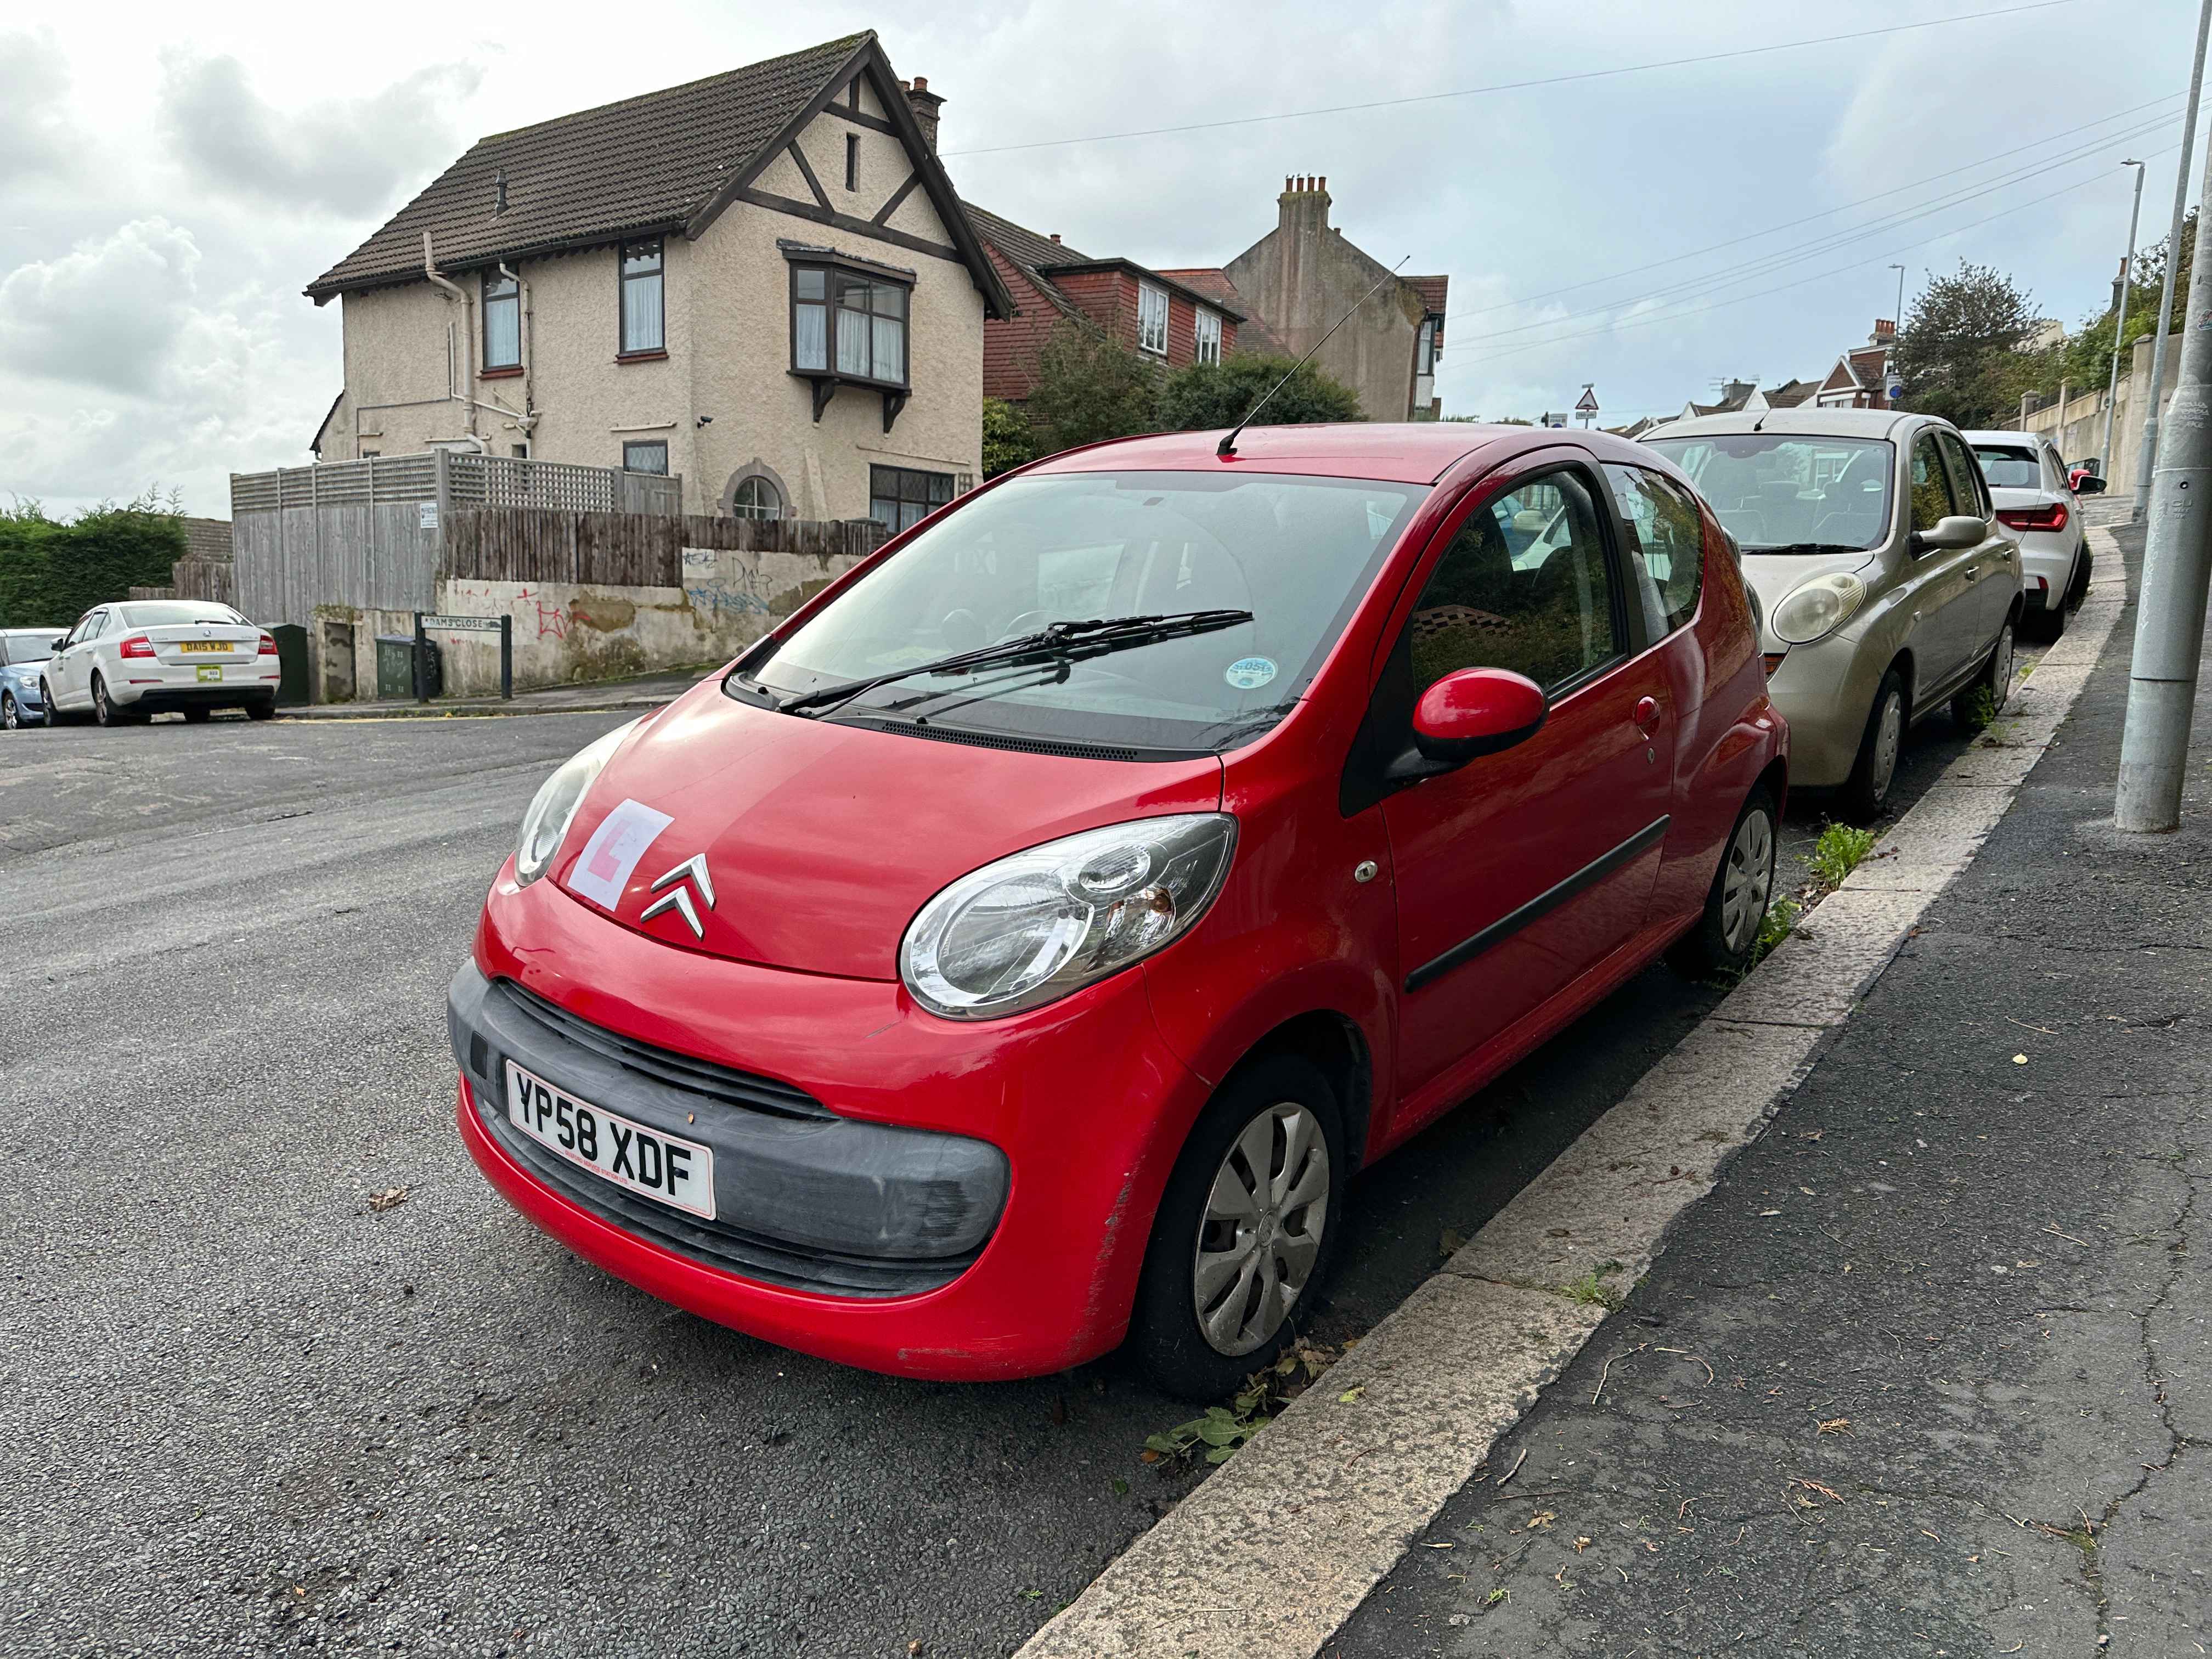 Photograph of YP58 XDF - a Red Citroen C1 parked in Hollingdean by a non-resident, and potentially abandoned. The first of five photographs supplied by the residents of Hollingdean.